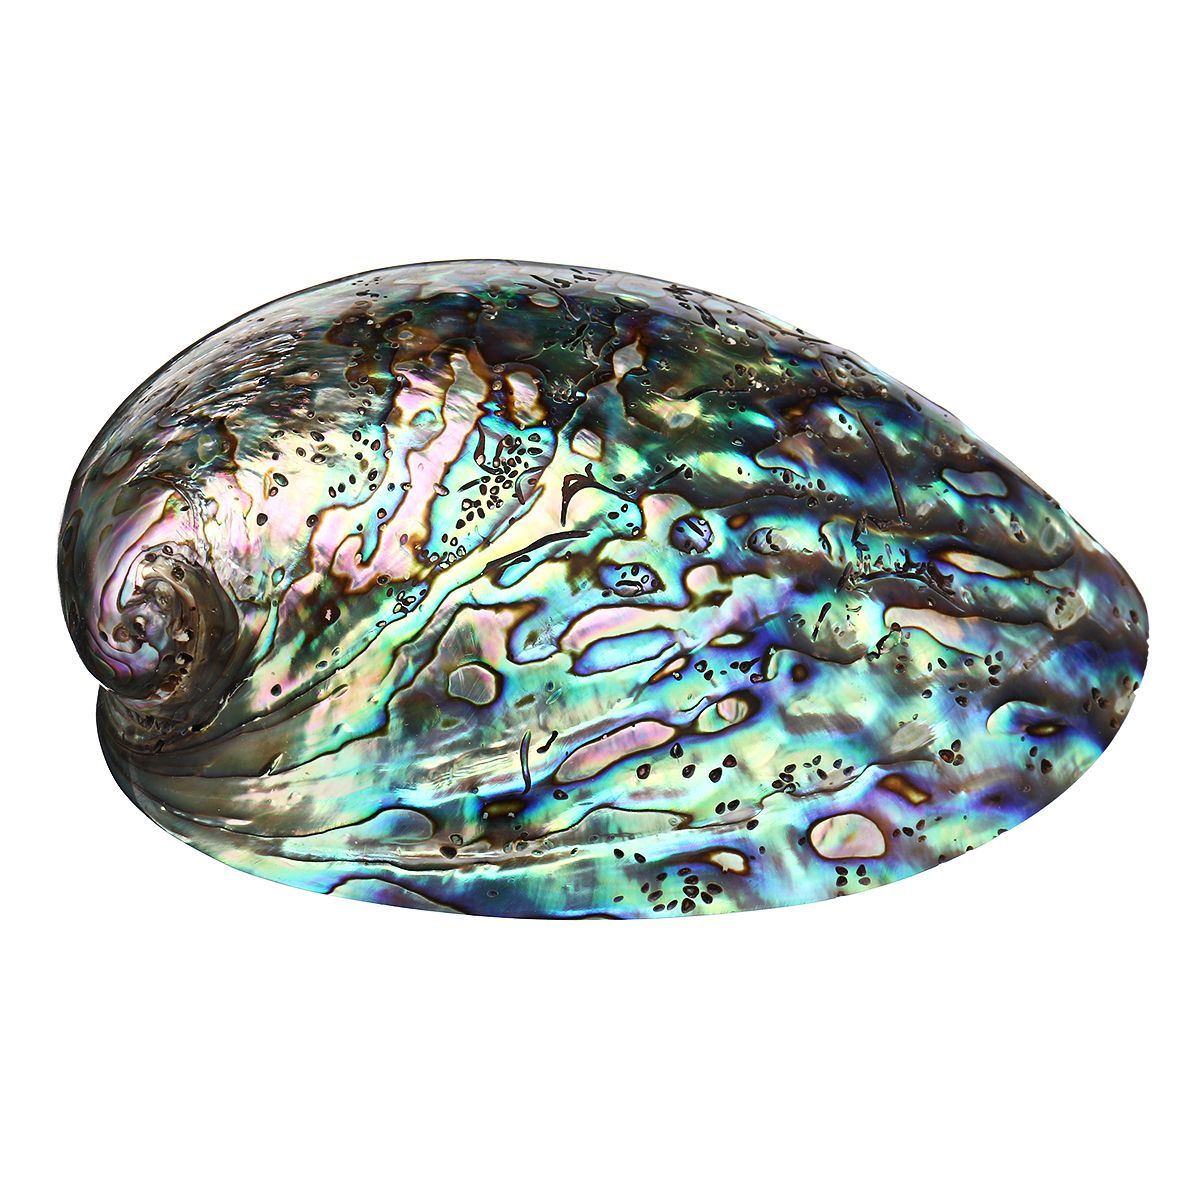 Natural-Fine-Polished-Abalone-Shell-Seashells-Conch-10-12cm-Home-Fish-Tank-Decorations-1537995